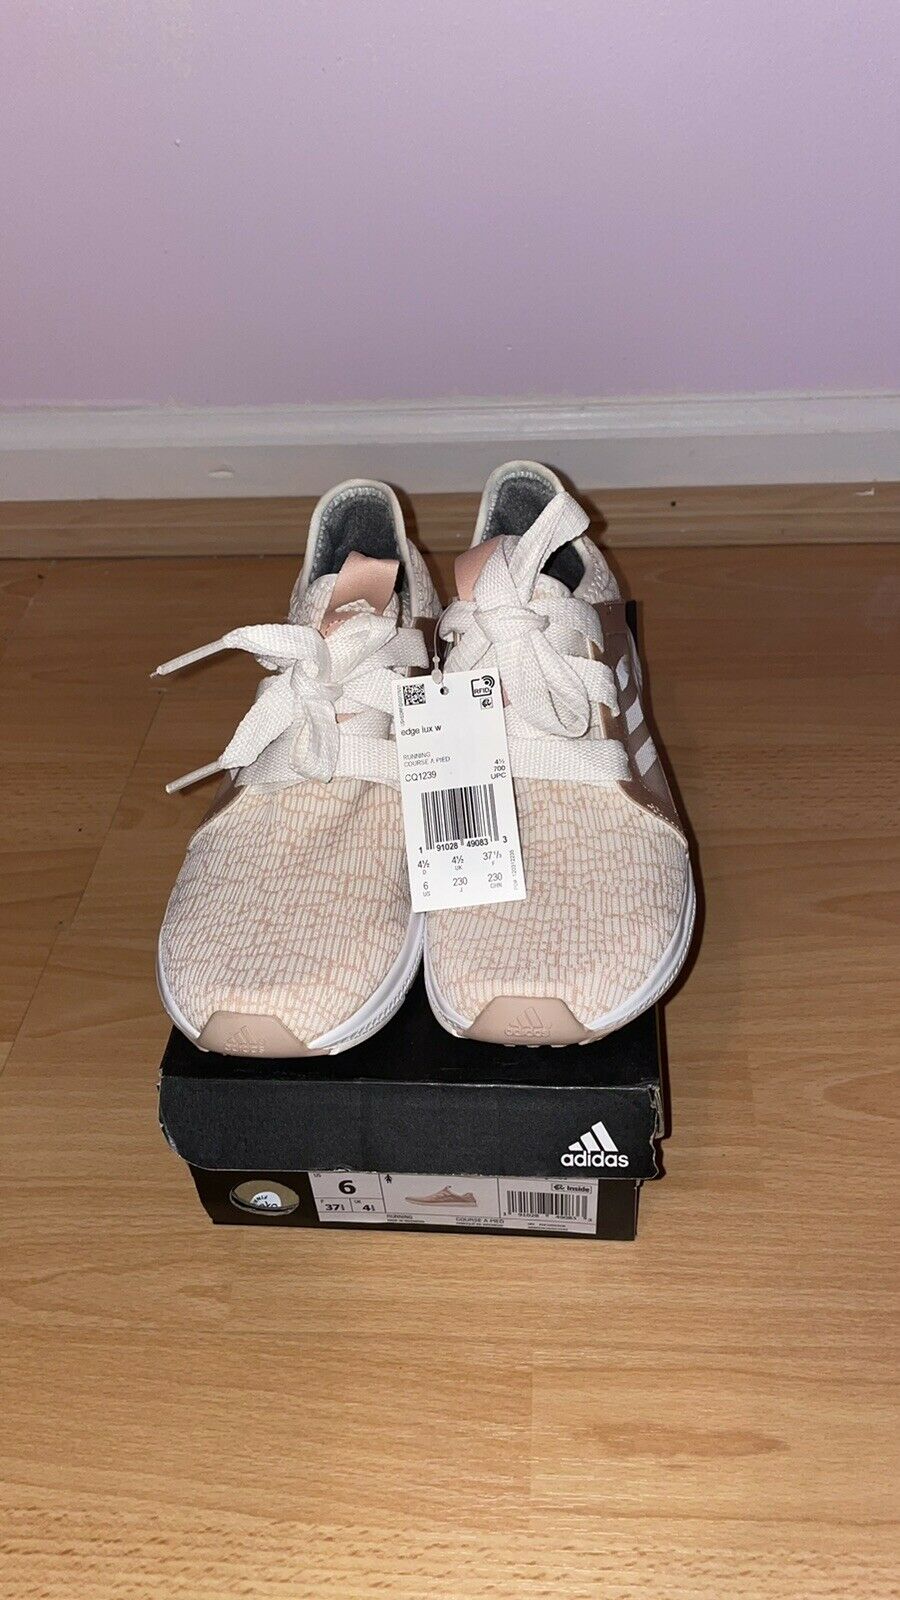 Adidas Edge Lux Women’s Shoes - (Size 6/Ash Pearl)